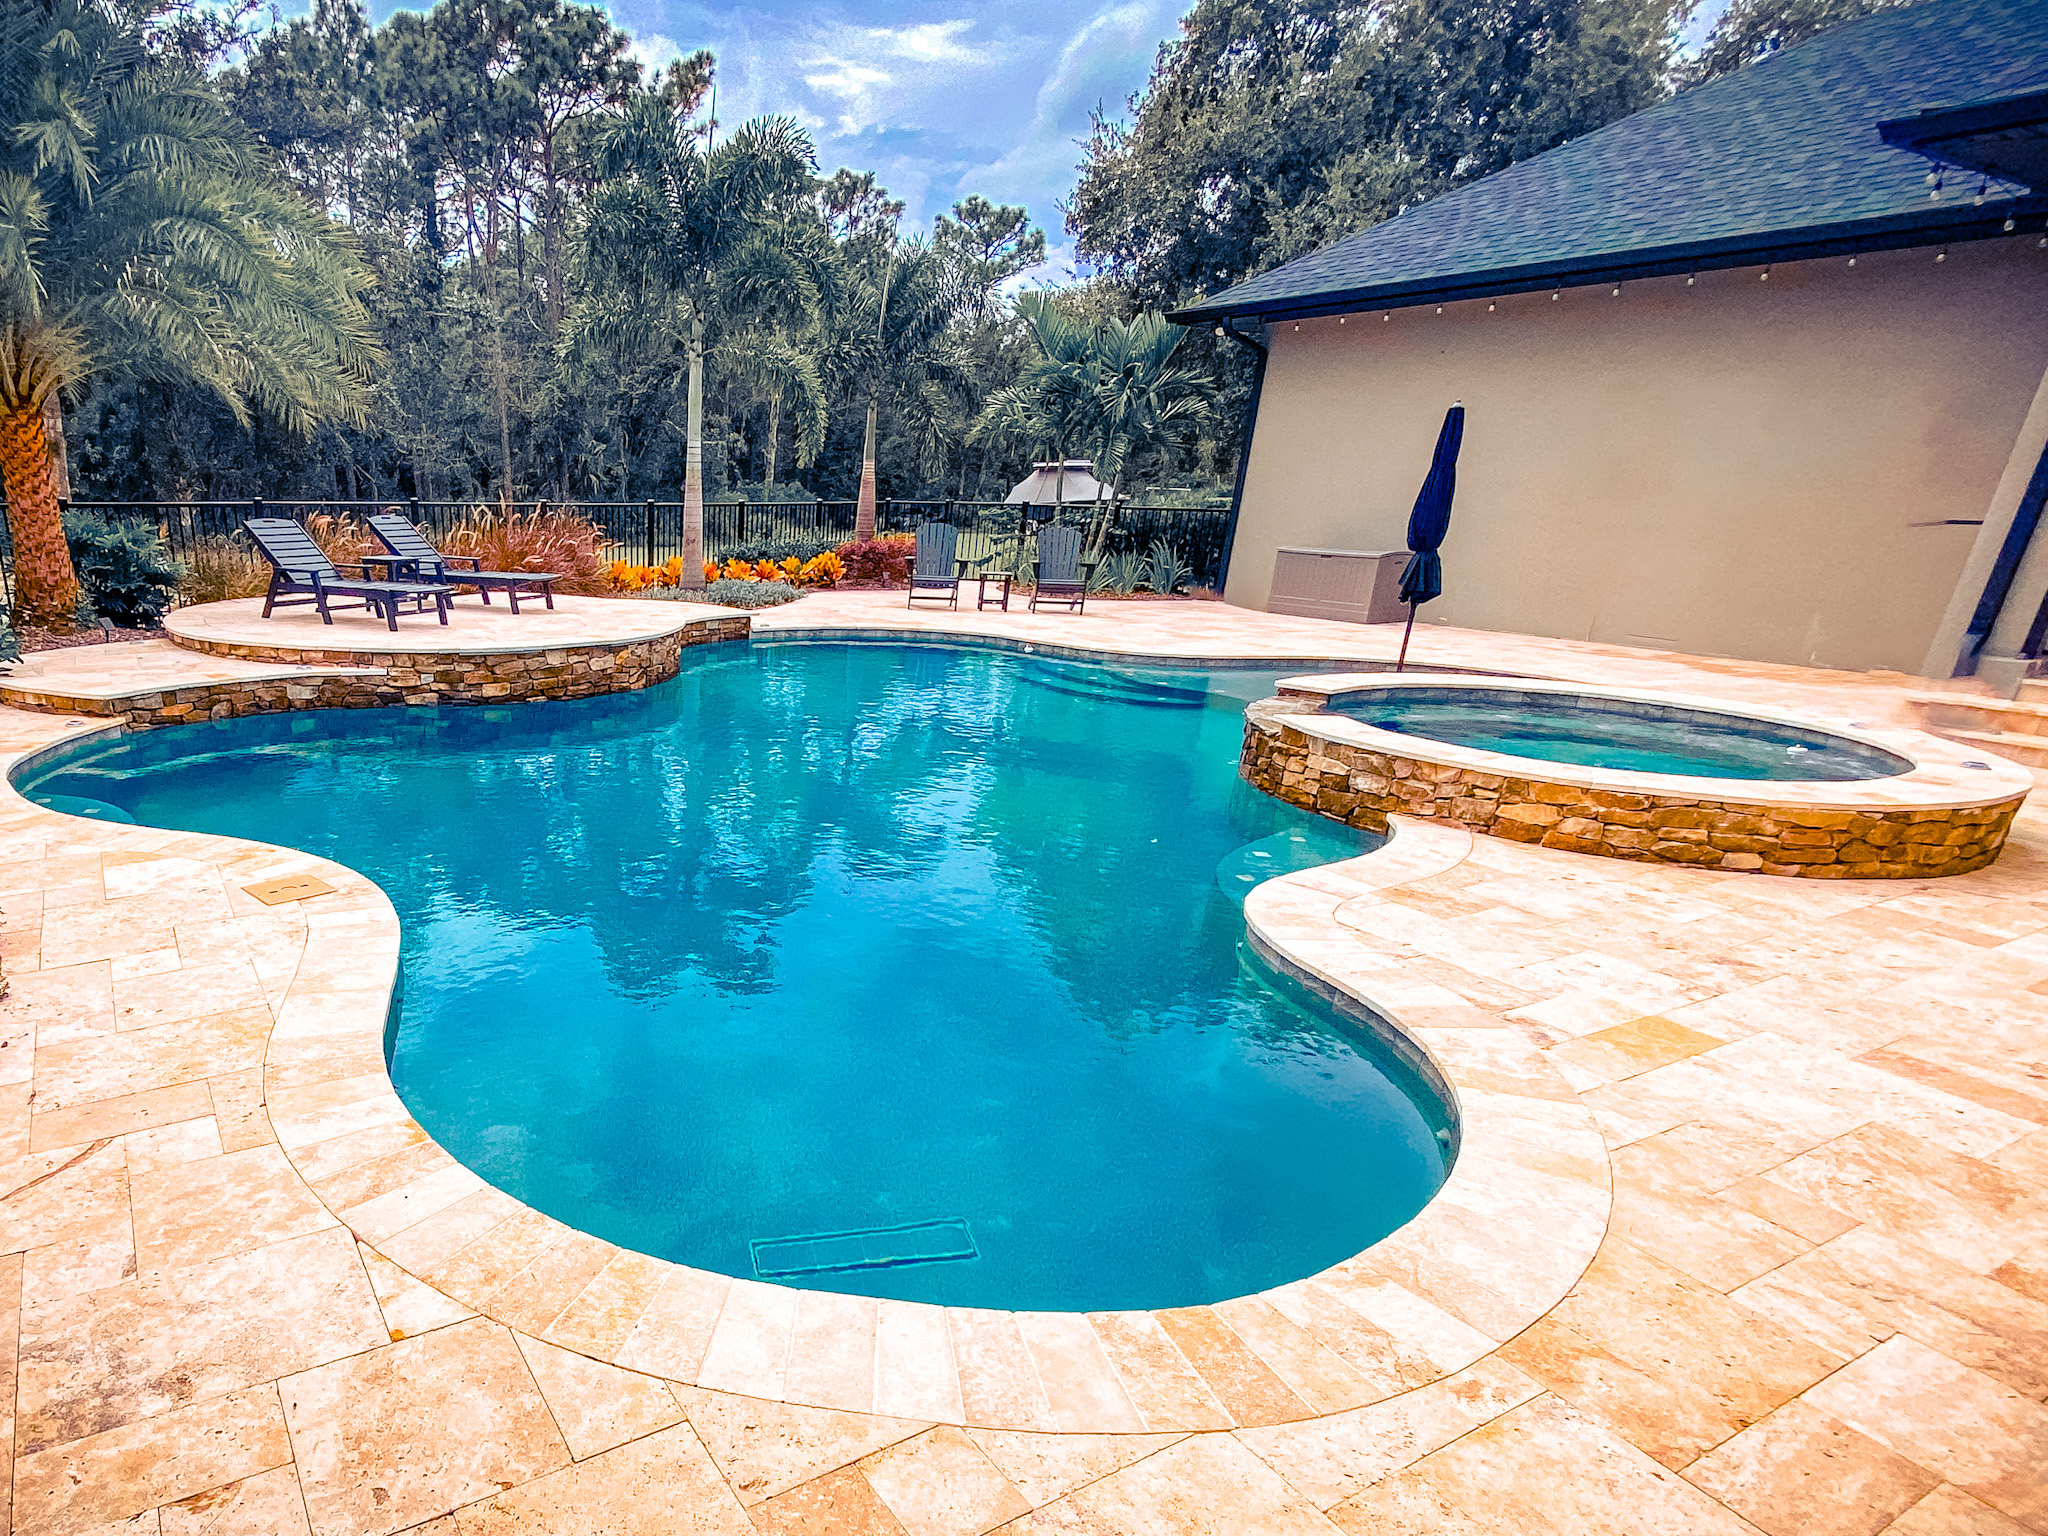 Luxurious outdoor poolside seating area with custom-designed pools by Yellowfin Pool Creations, Central Florida